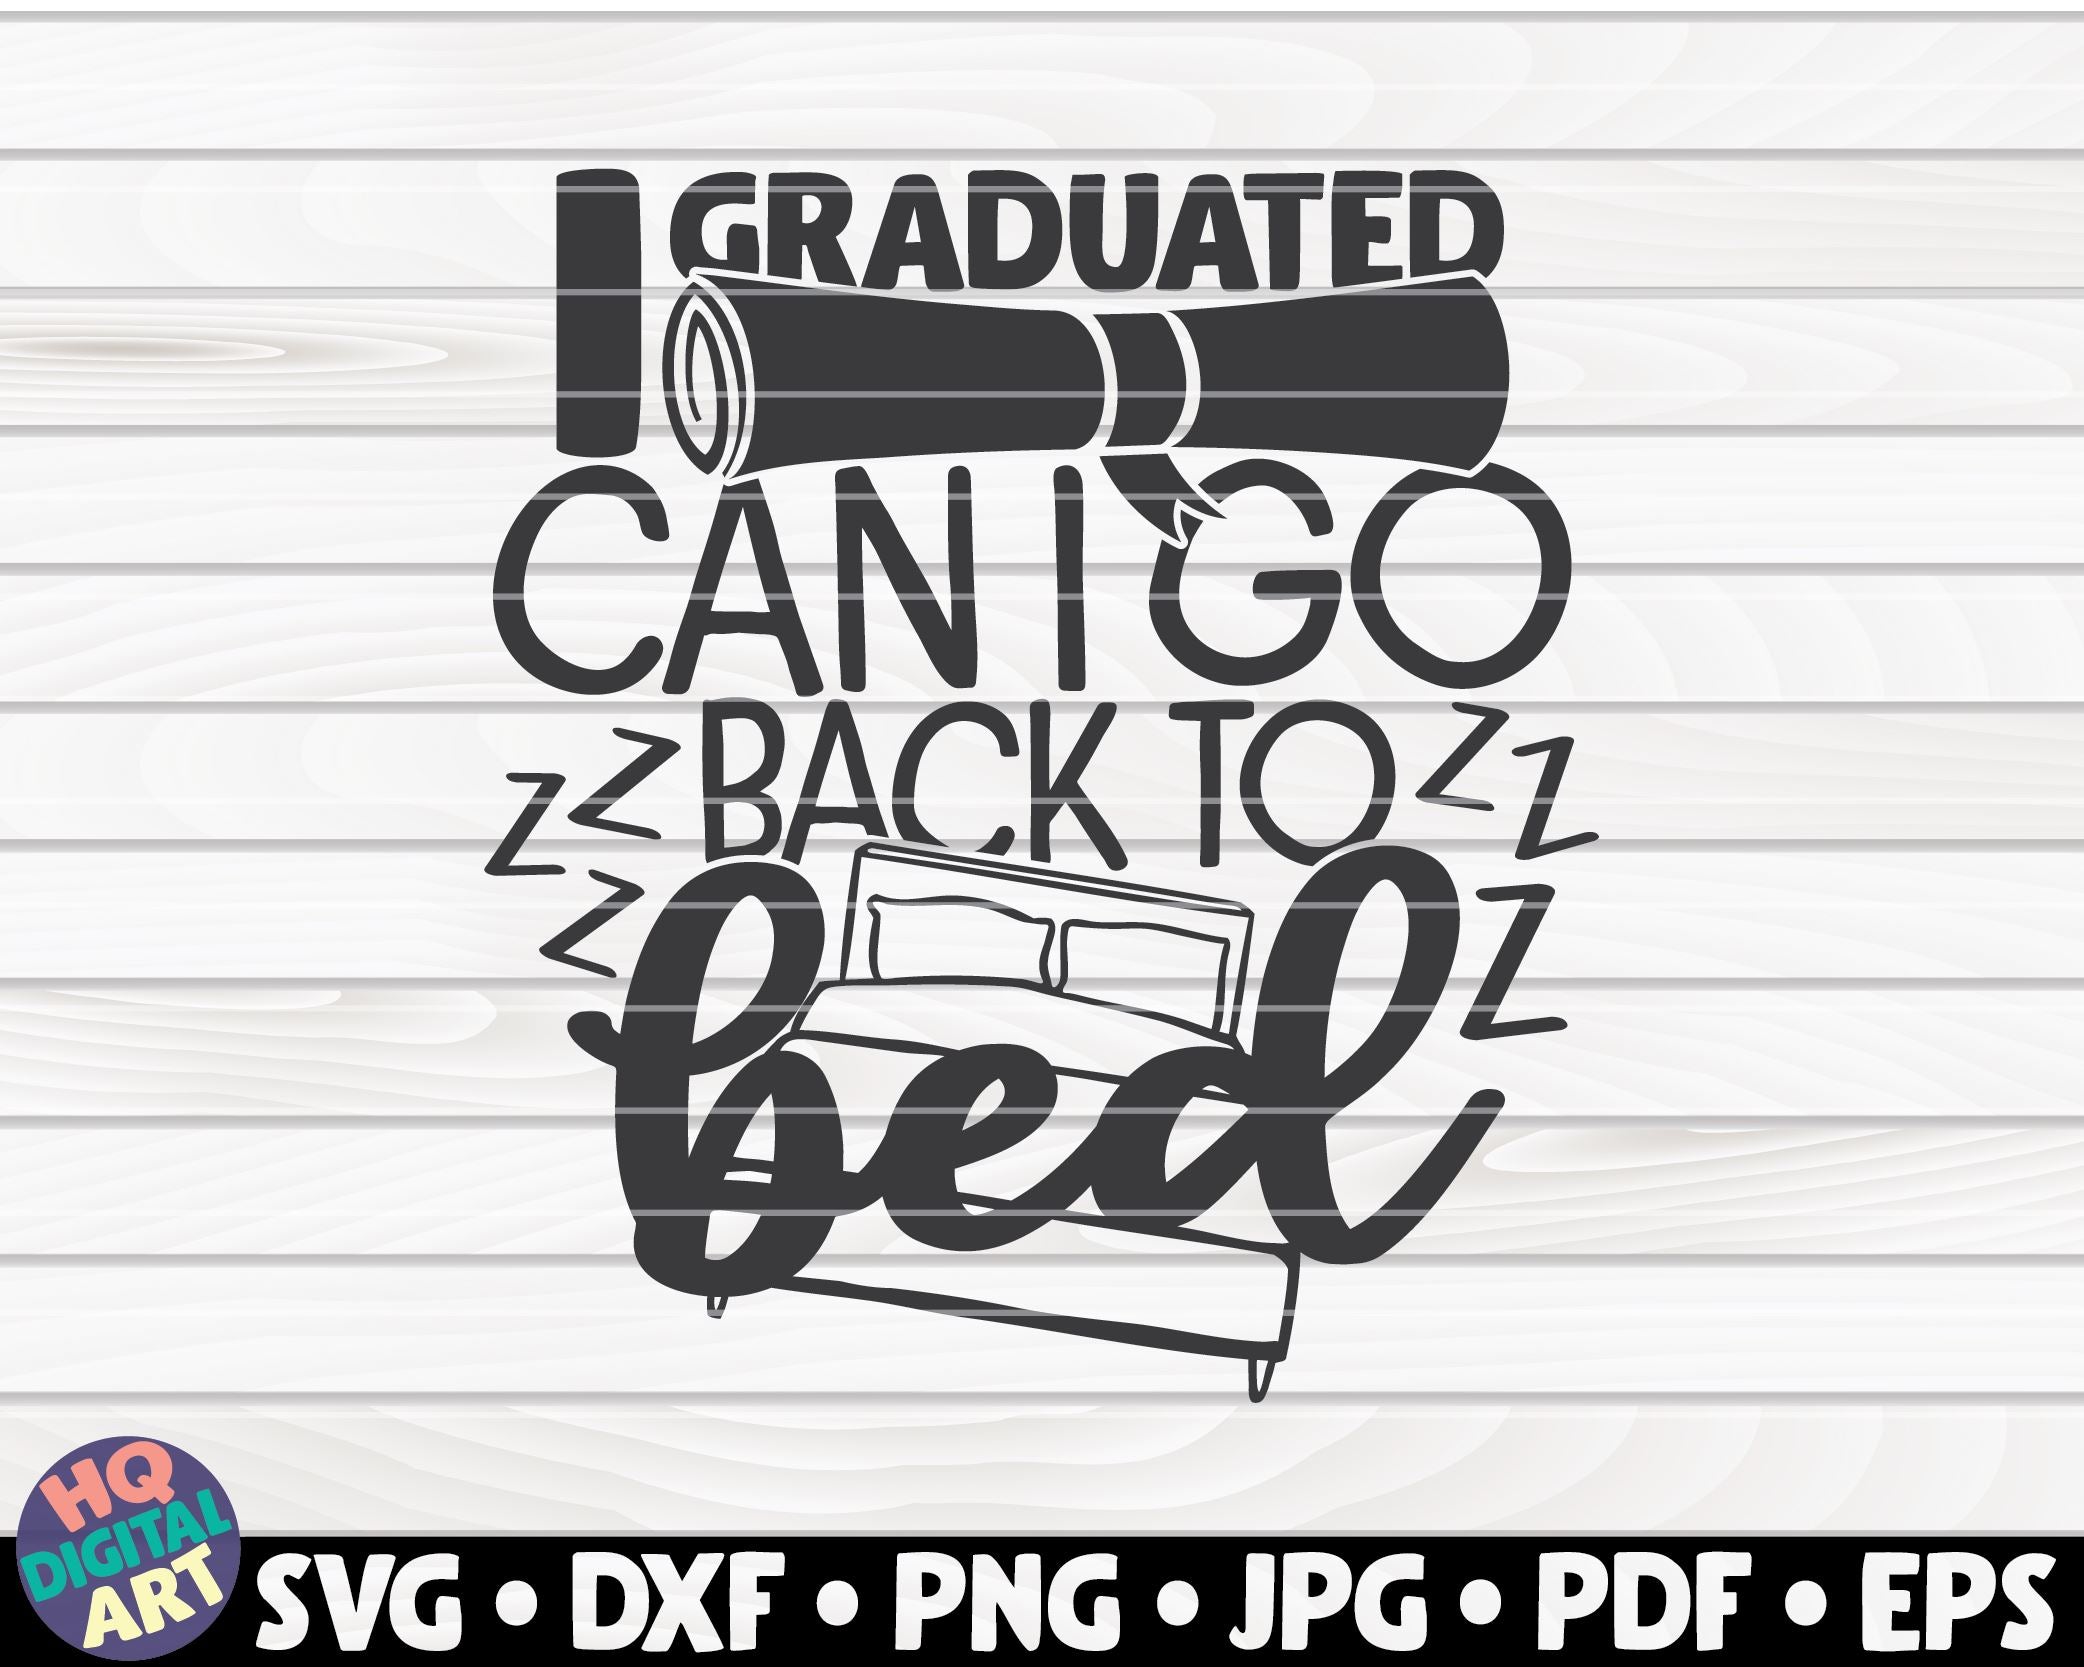 Download Can I Go Back To Bed Now Svg I Graduated Svg I Graduated Can I Go Back To Bed Now Svg Funny School Svg Funny Graduation Svg Quote Collage Sheets Craft Supplies